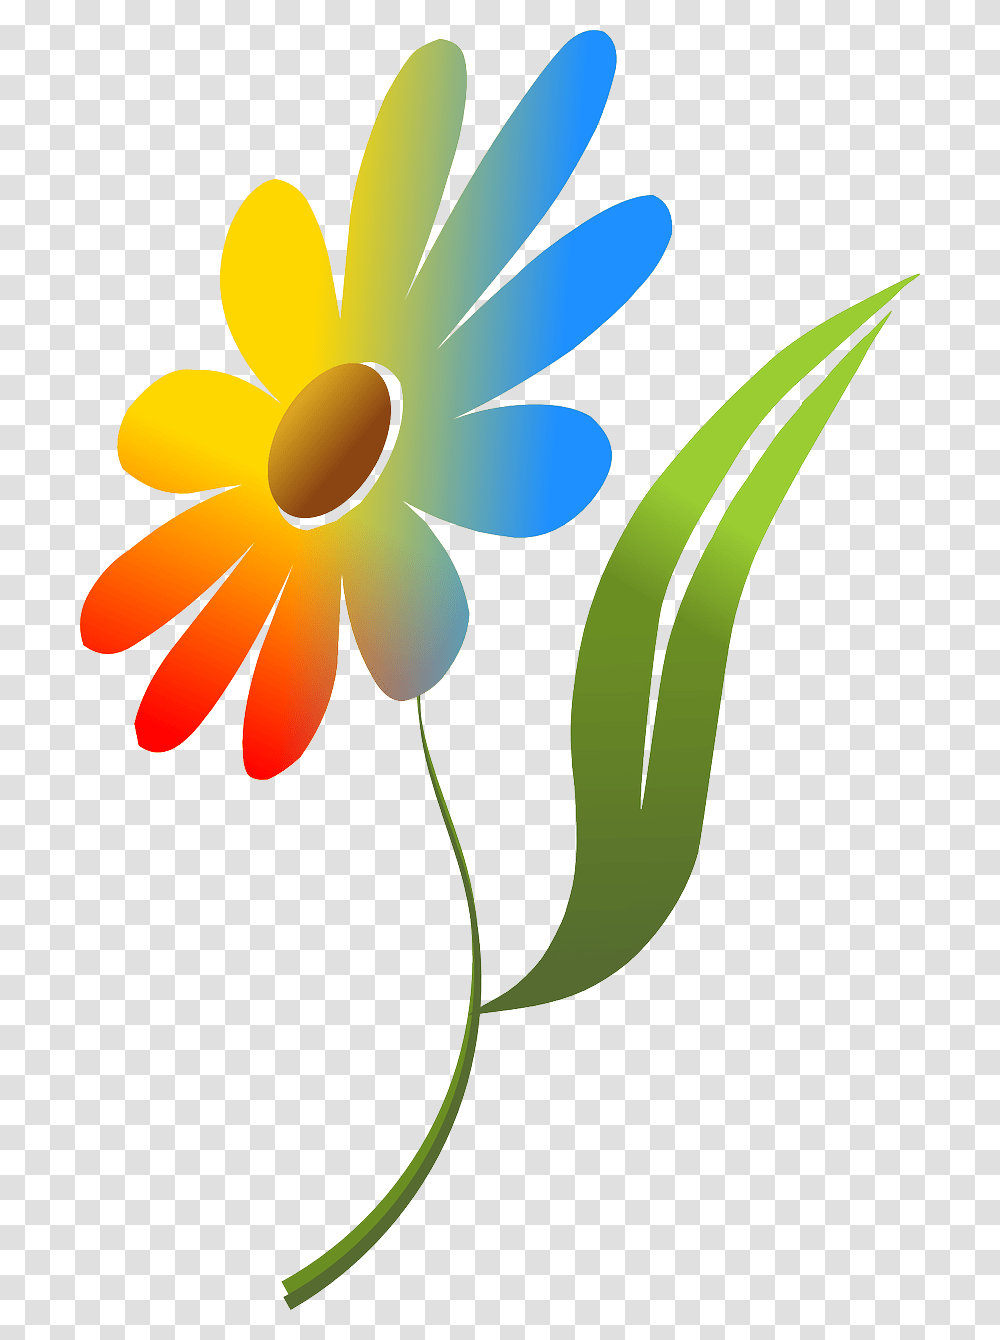 Never Thought I Could Hate, Floral Design, Pattern Transparent Png